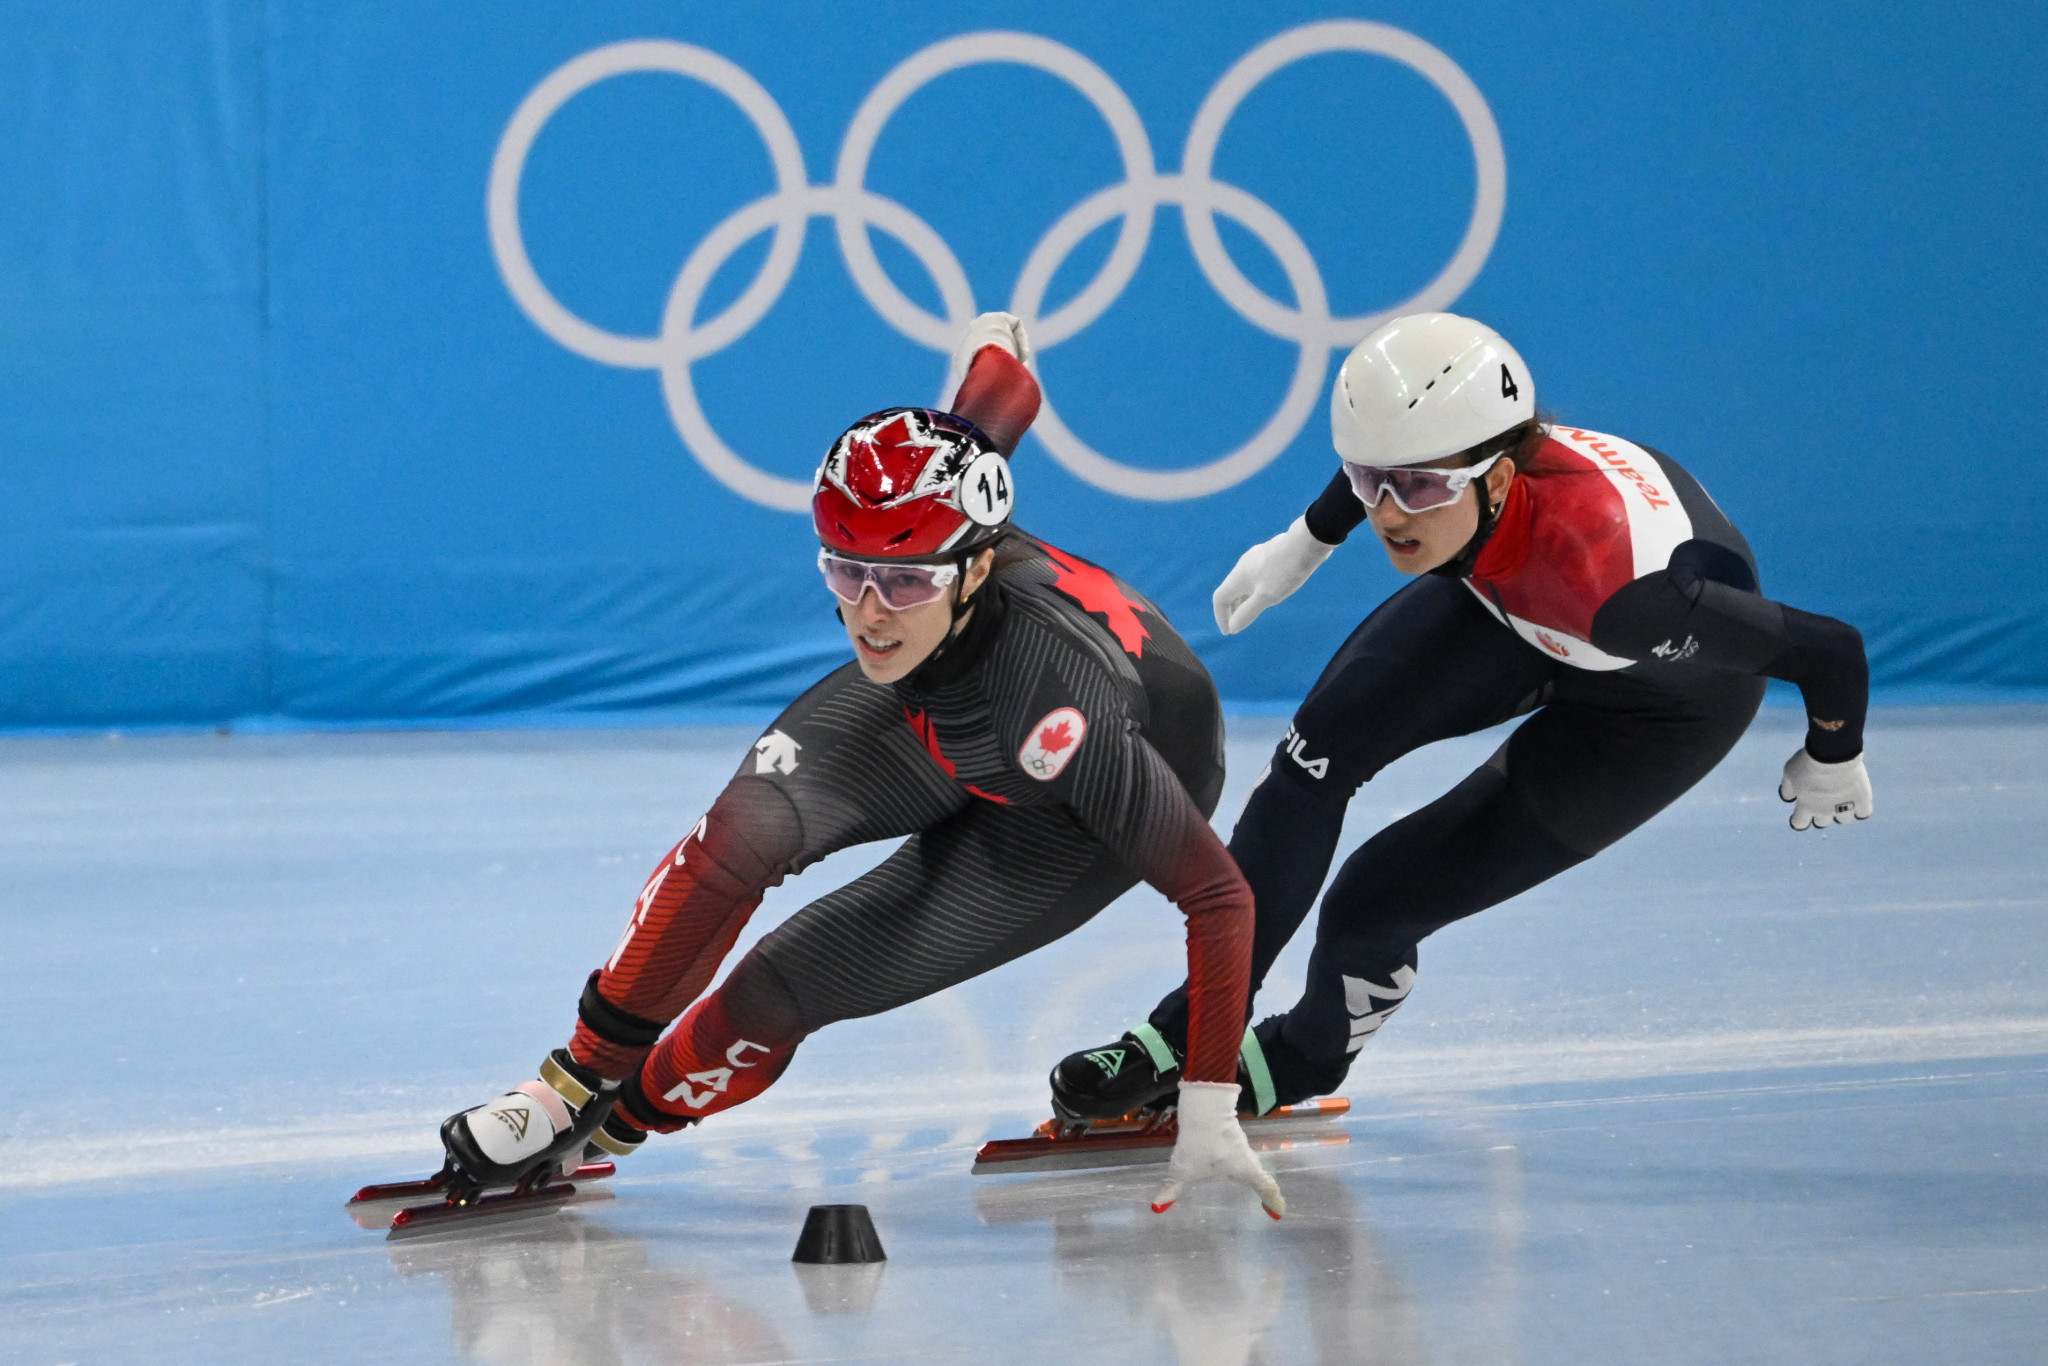 Canadian Brunelle claims three titles at World Junior Short Track Speed Skating Championships